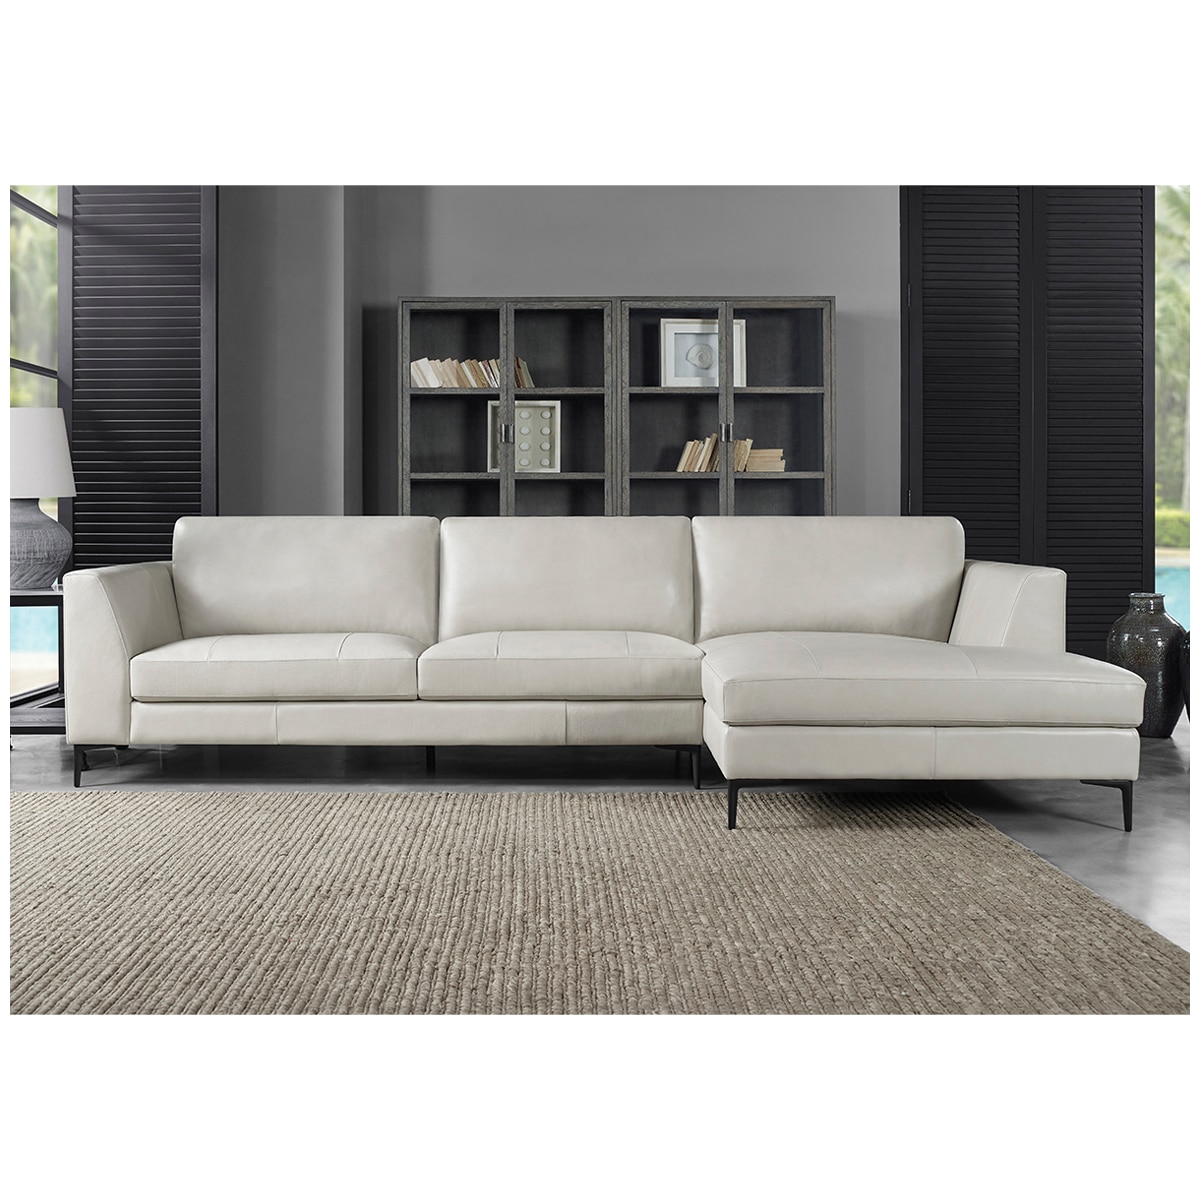 Thomasville 2 Piece Leather Sectional